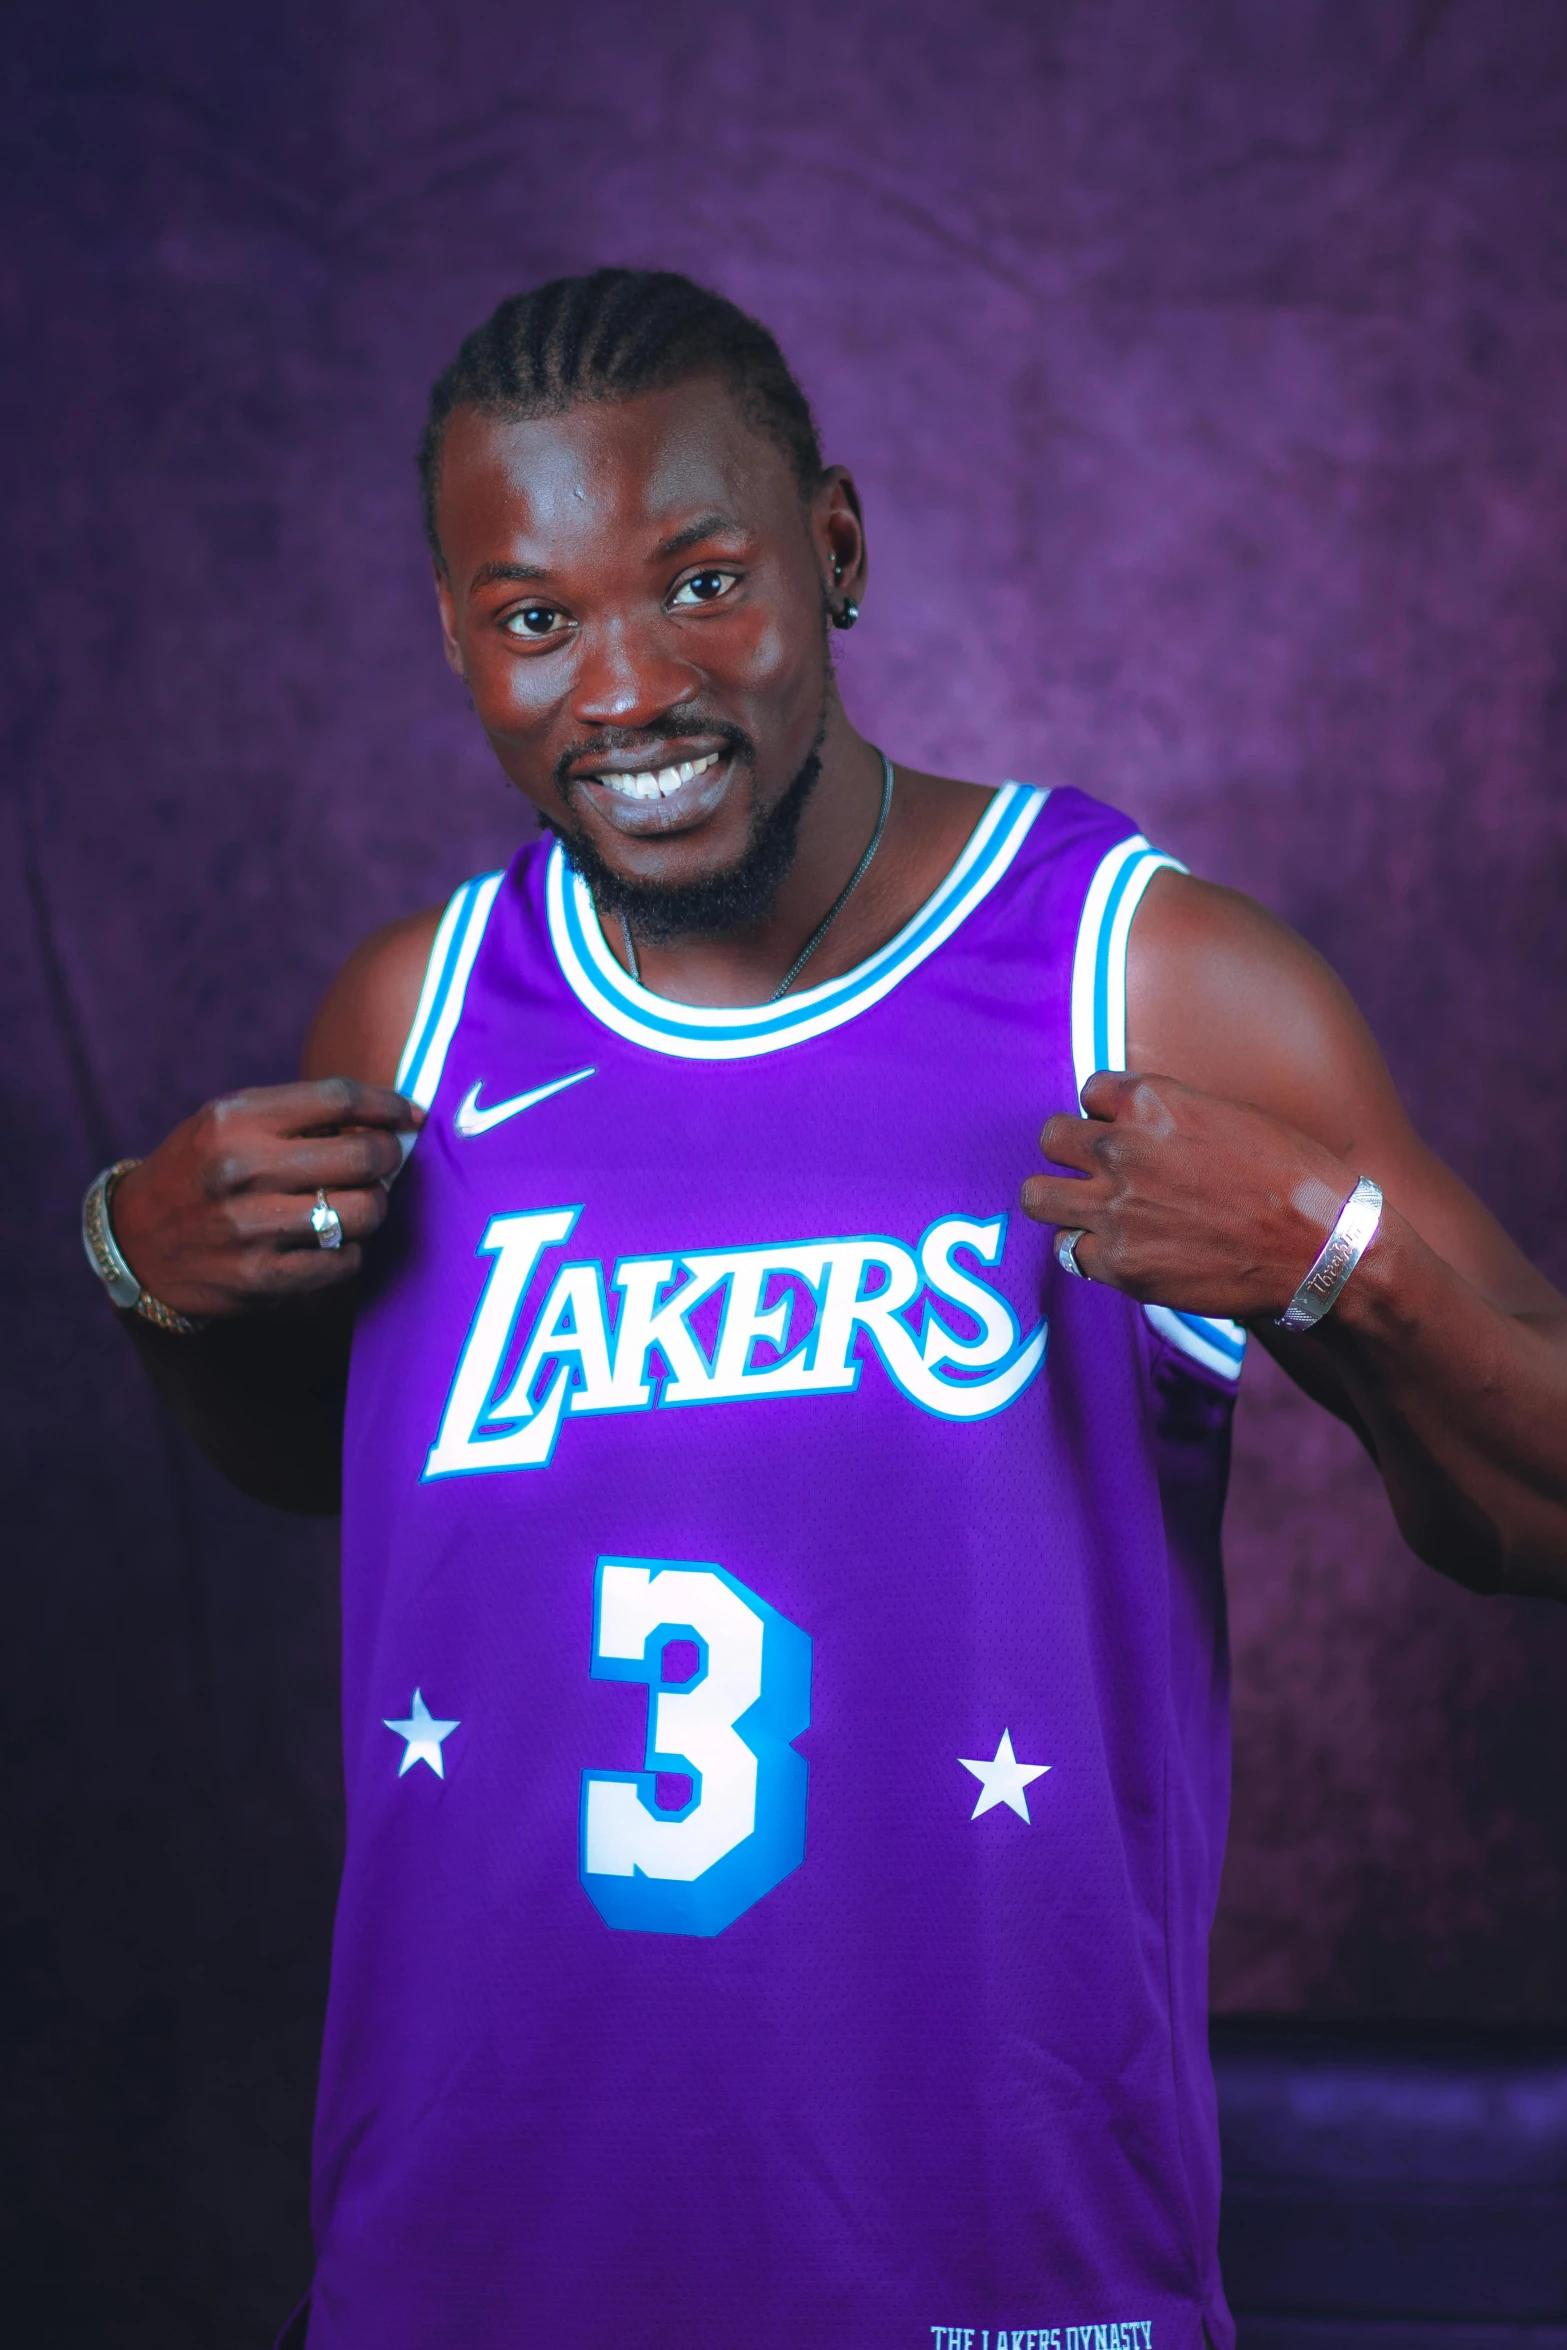 man dressed as the los angeles lakers posing for the camera